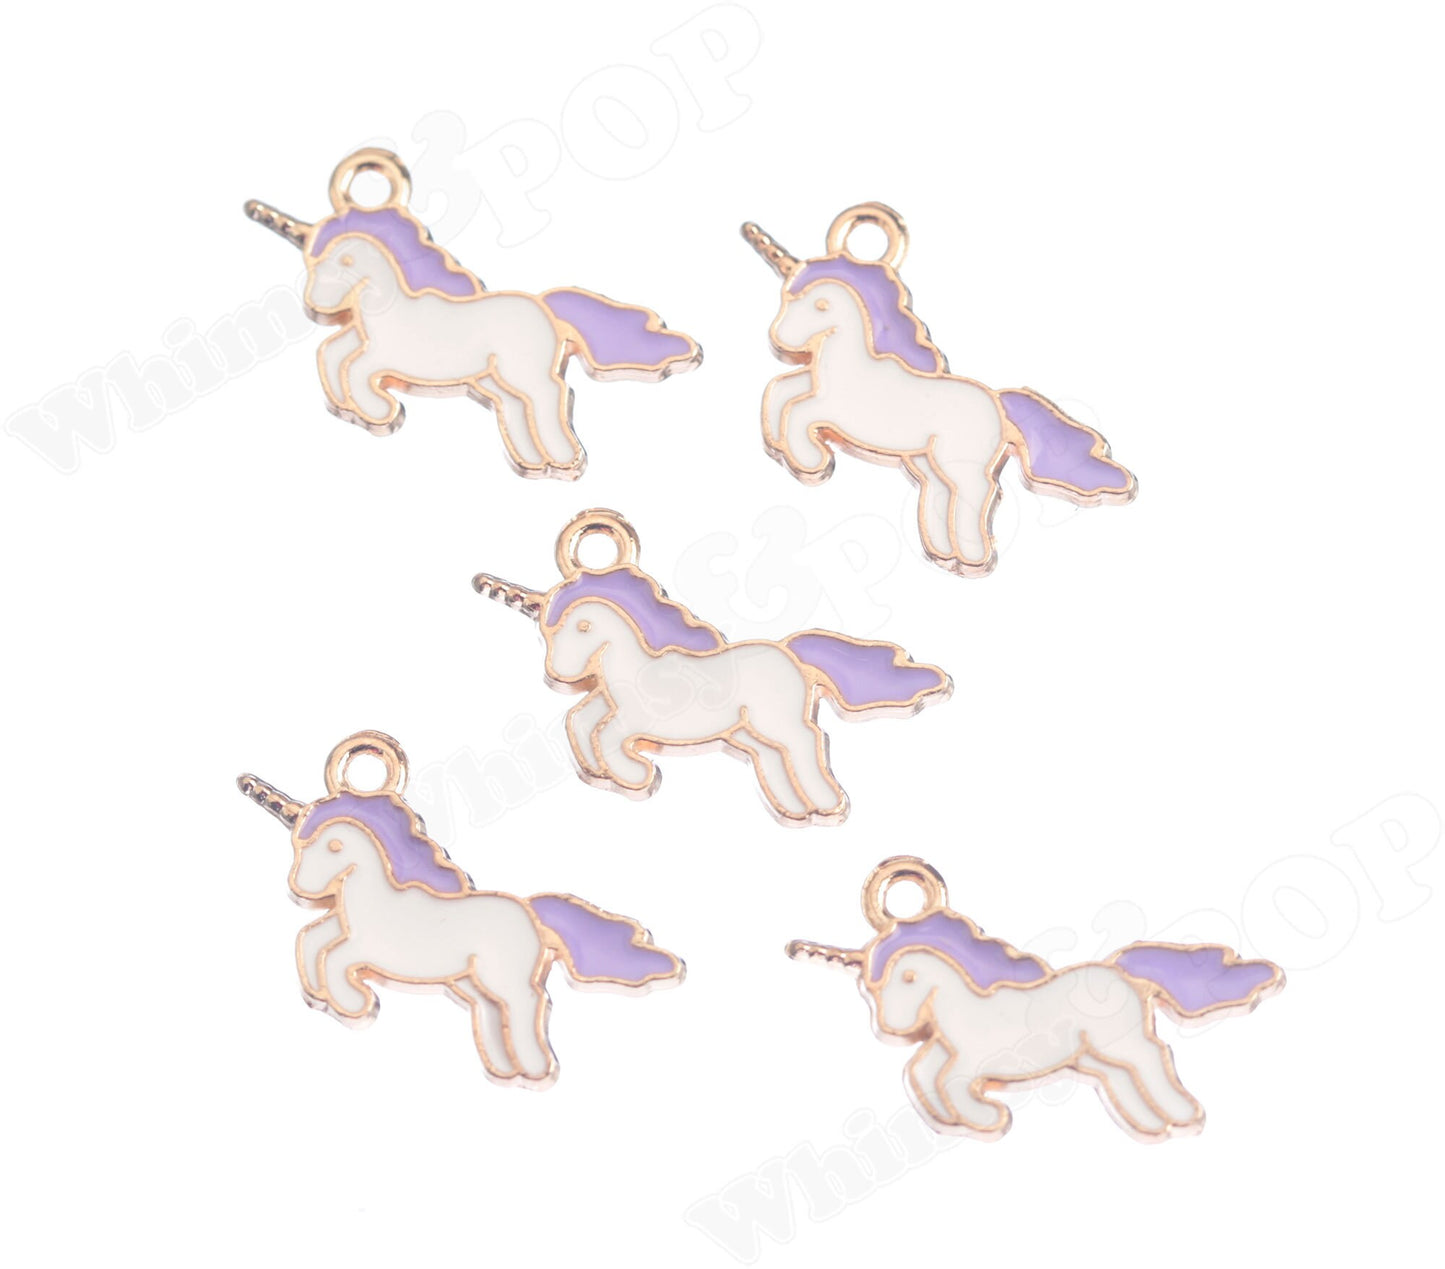 These purple unicorn charms make great earrings and can be added to a charm bracelet or necklace.